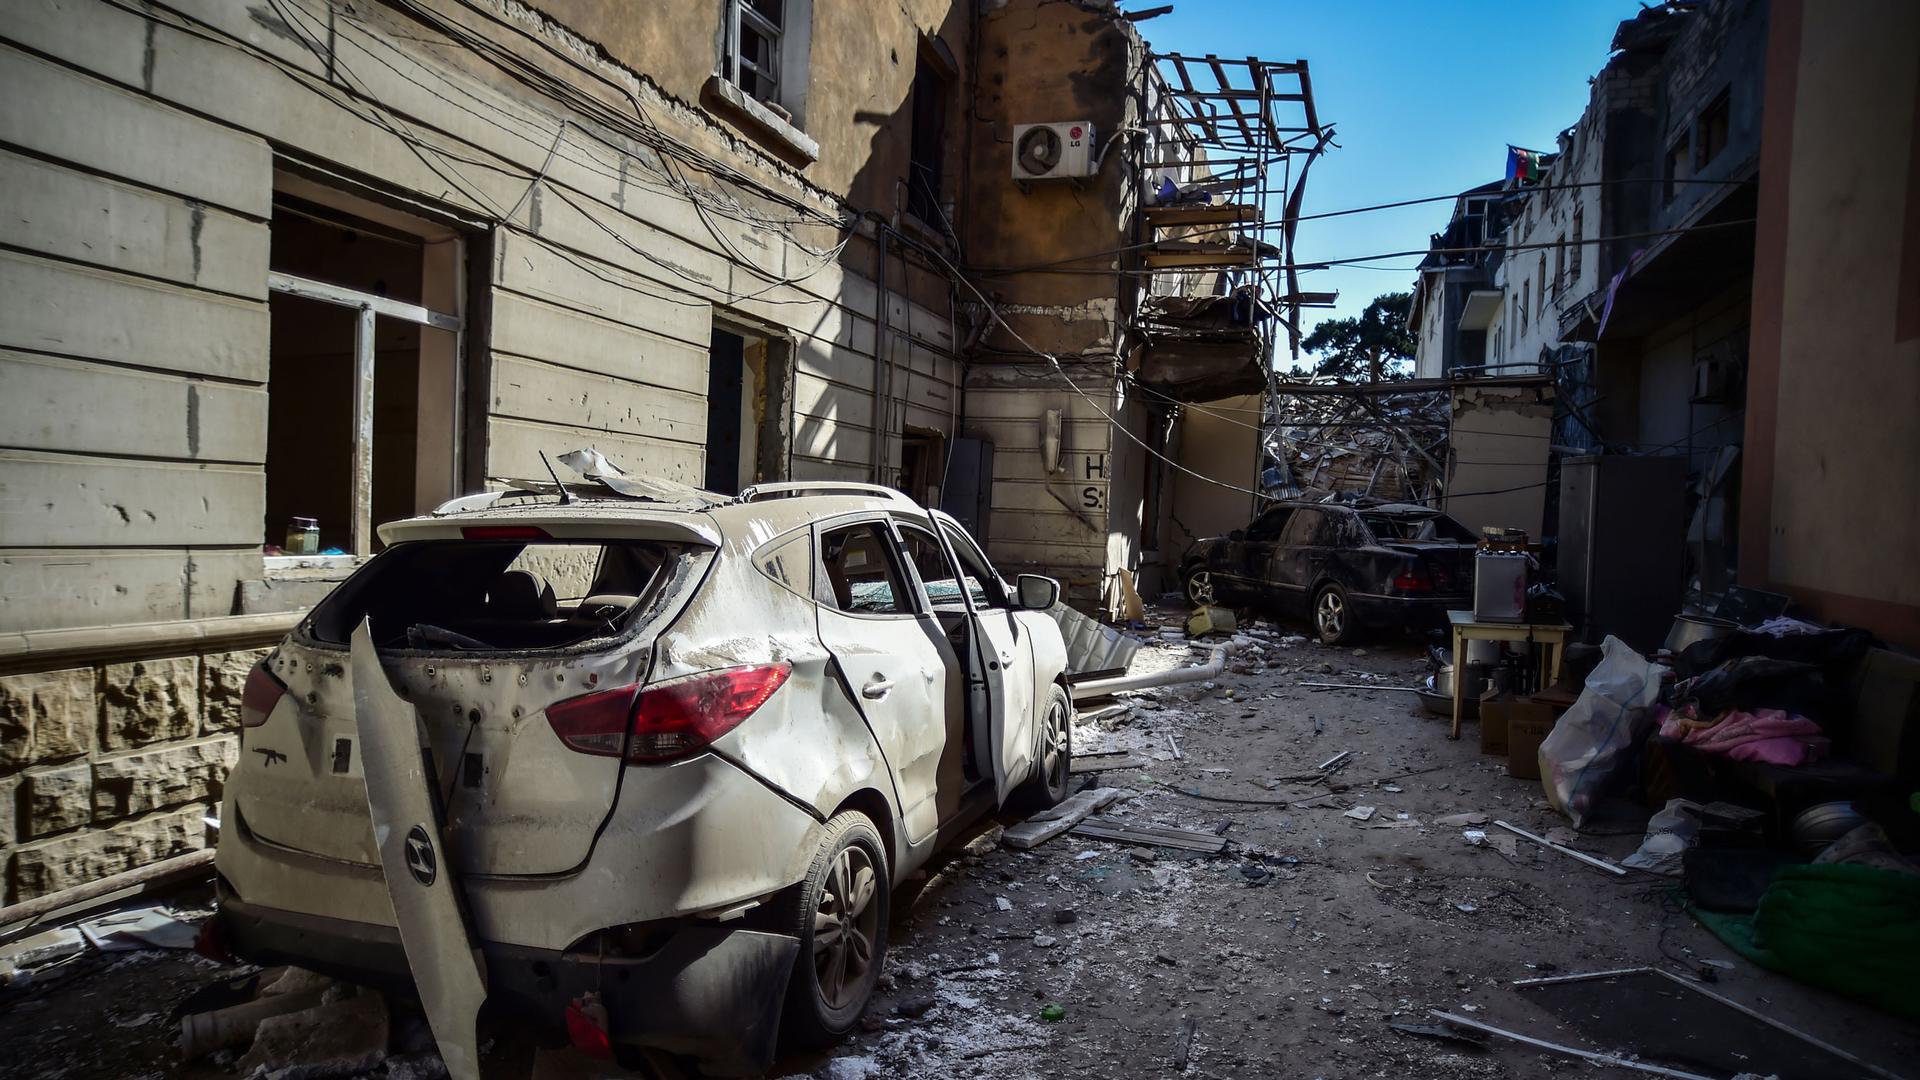 A heavily damaged car is shown in an alley in the nearground with several damaged buildings in the distance.